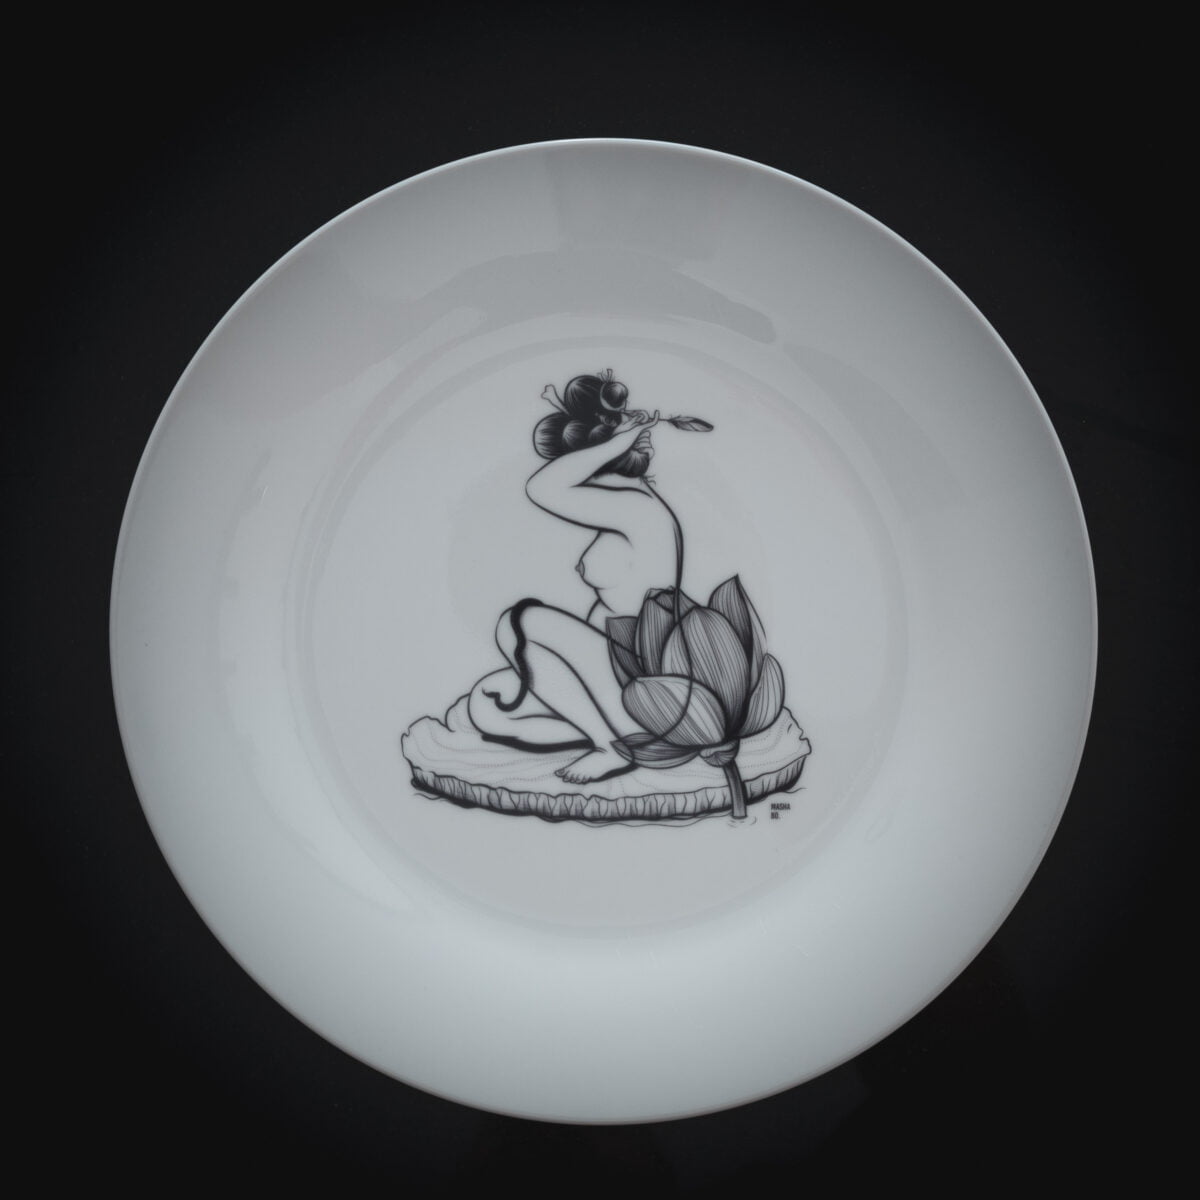 Original plate from contemporary artist - Masha Bo for sell. Plate with image of naked woman sitting on lotus plant leaf and braids her hair. View from the back.